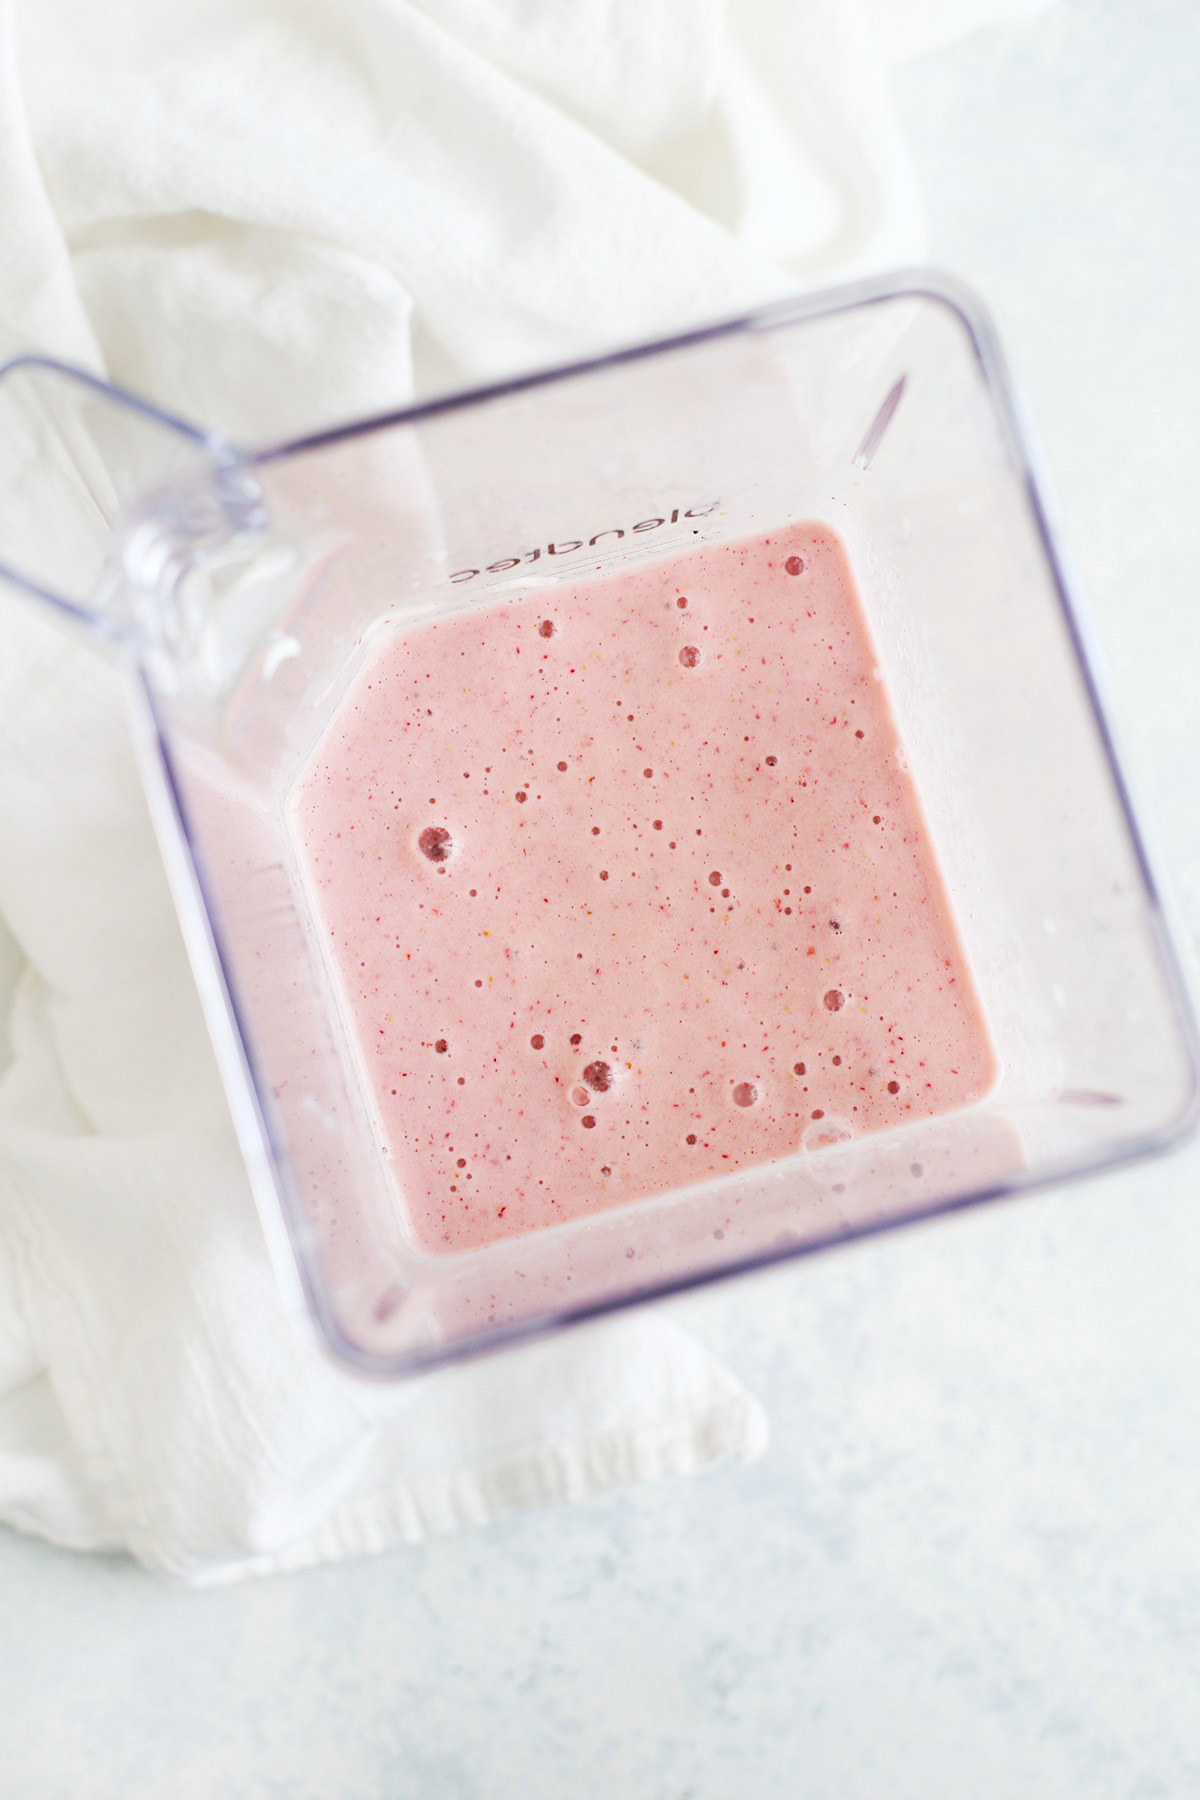 Strawberry Banana Smoothie from One Lovely Life